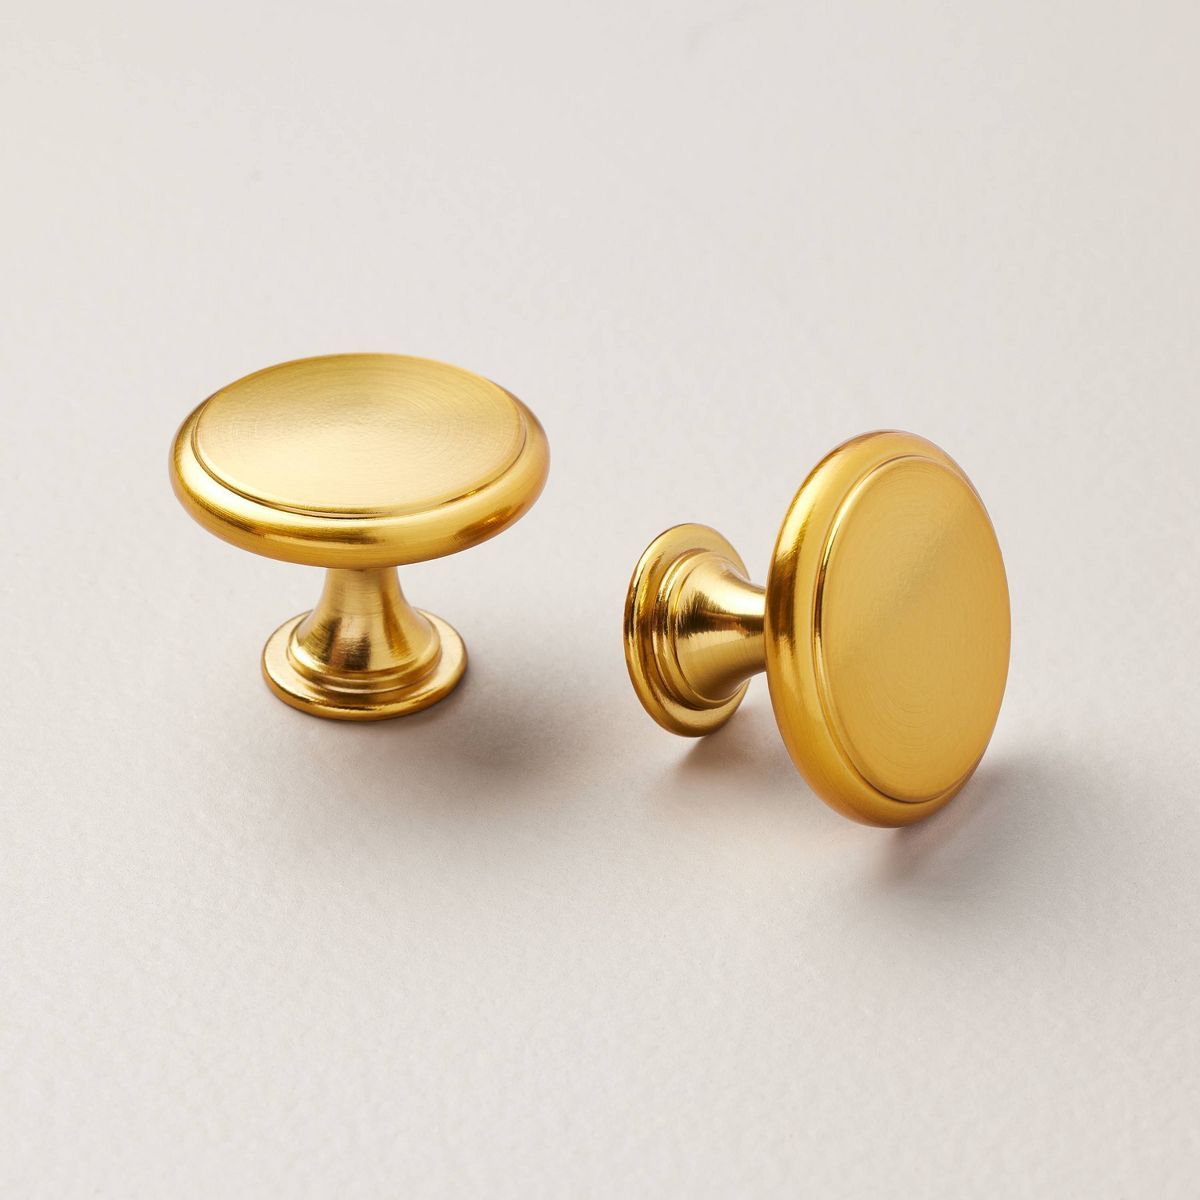 Classic Cabinet Knobs (Set of 2) - Hearth & Hand™ with Magnolia | Target